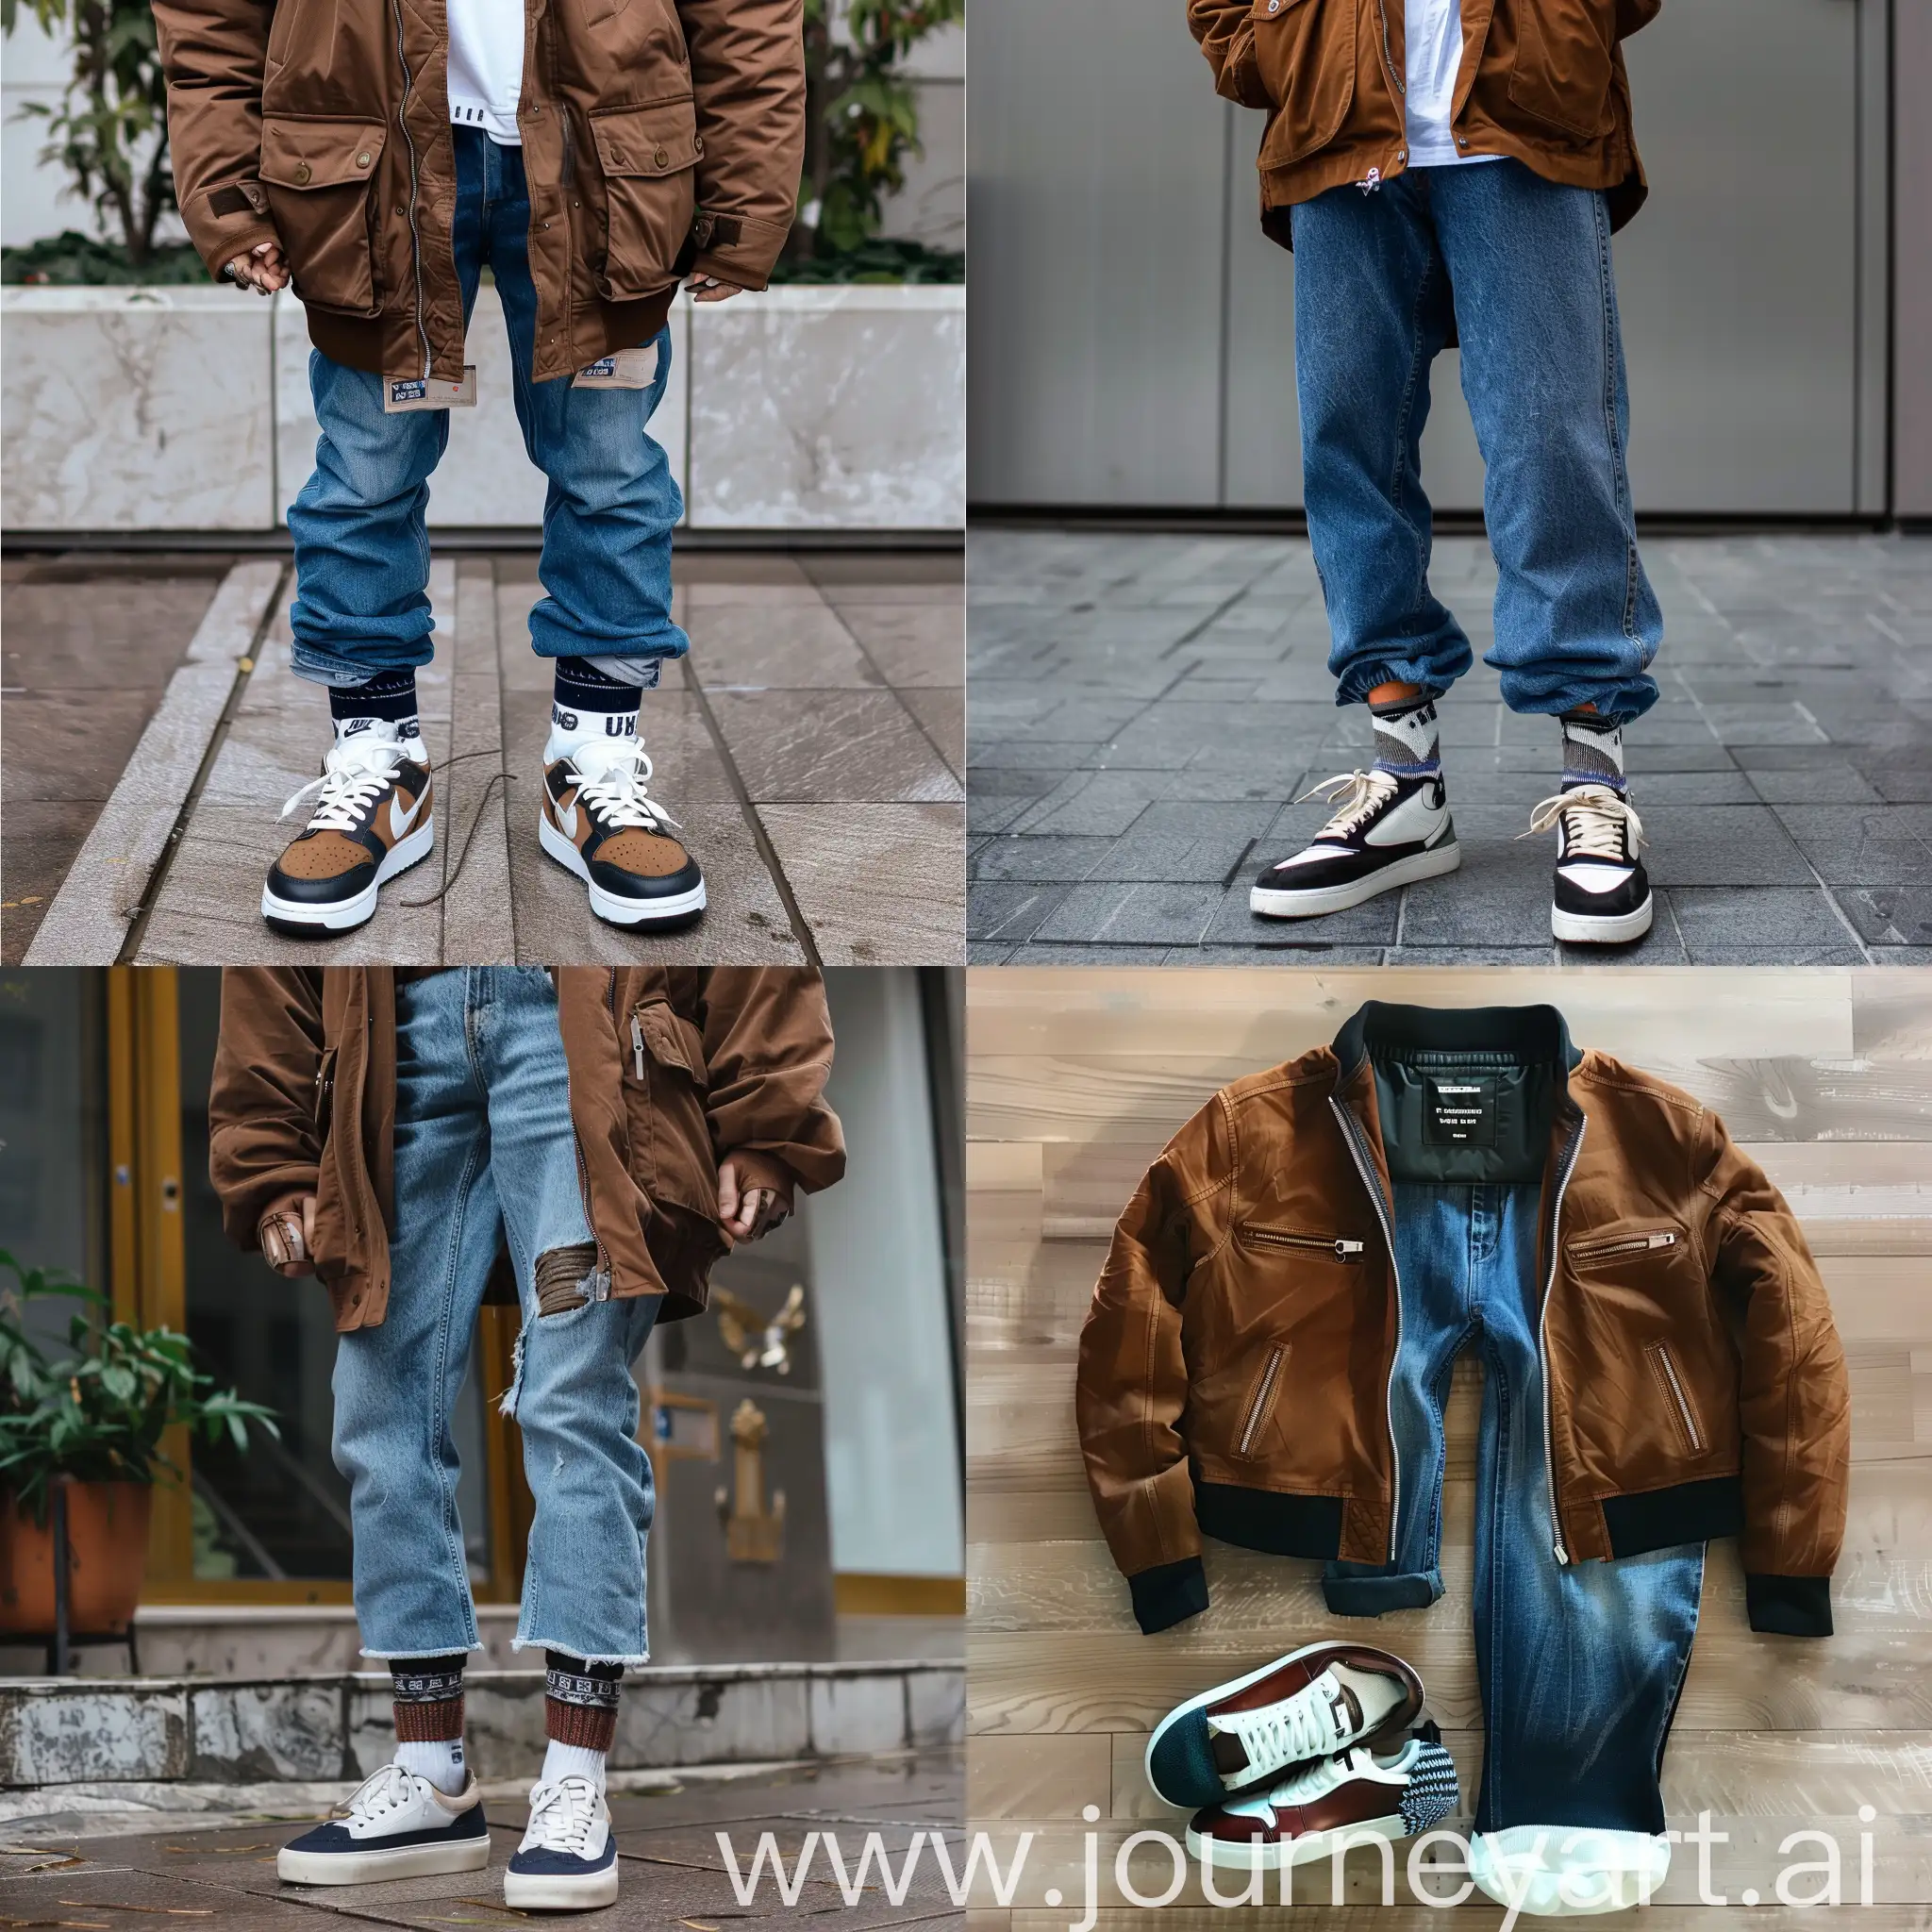 Stylish-Outlook-Urban-Fashion-with-Brown-Jacket-Blue-Jeans-and-Unique-Uzbekistan-Socks